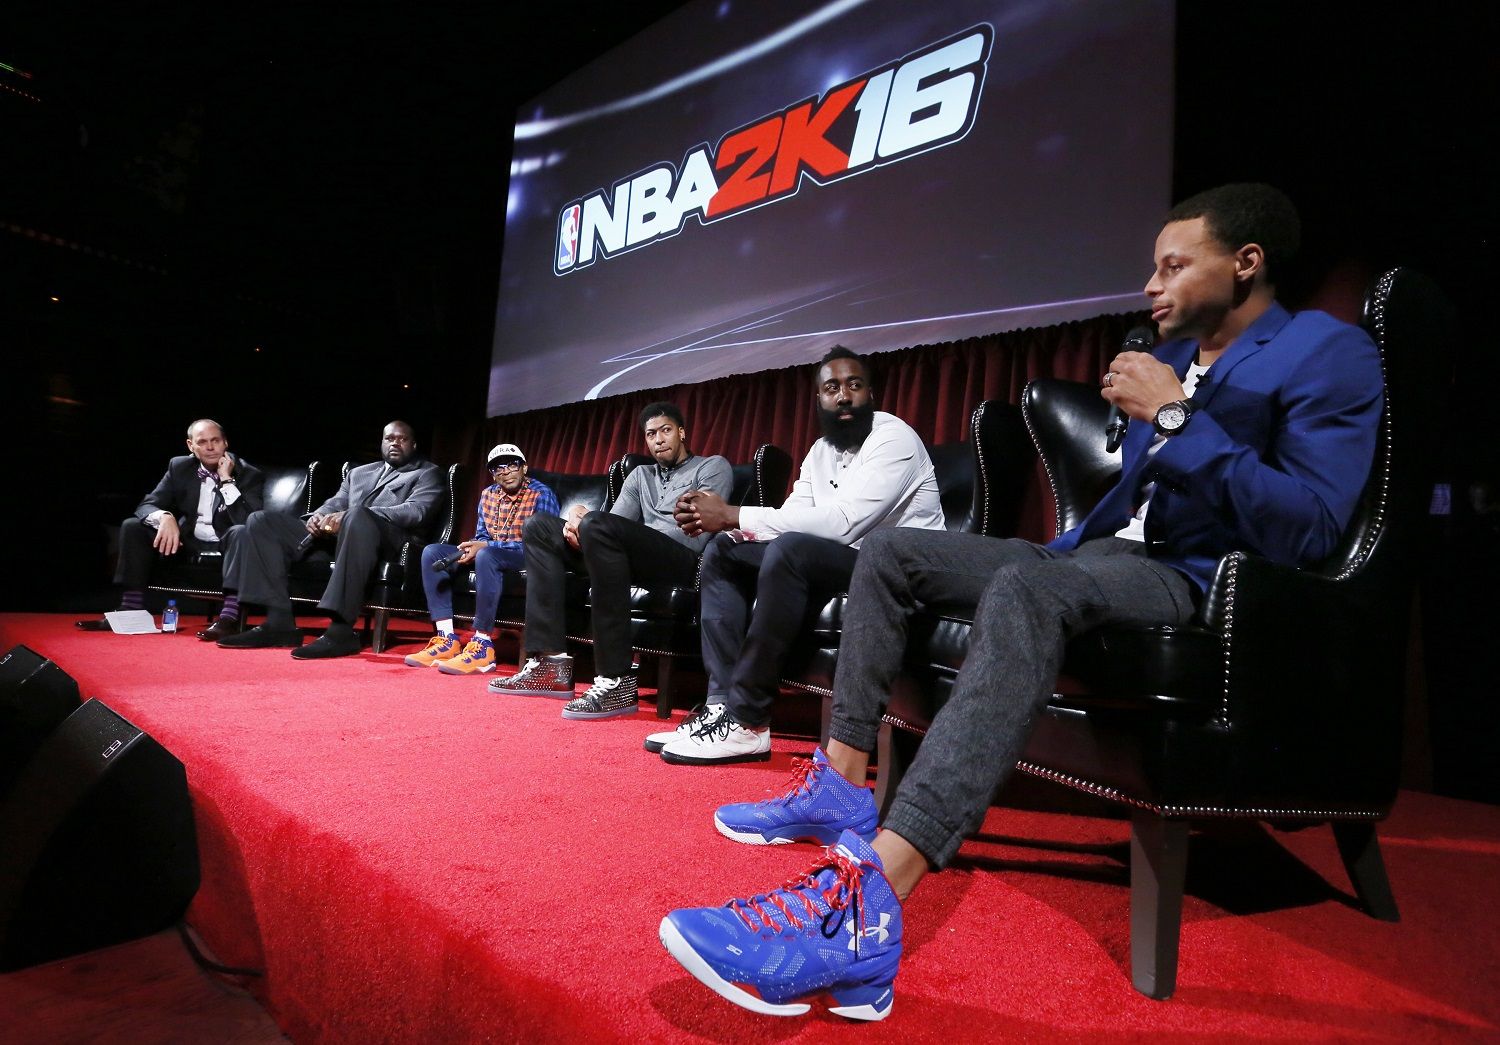 IMAGE DISTRIBUTED FOR 2K - Pictured from left to right, Ernie Johnson, Shaquille O'Neal, Spike Lee, Anthony Davis, James Harden and Steph Curry tell all at the NBA 2K16 Uncensored Premiere Event at Marquee on Monday, Sept. 21, 2015, in New York. (Photo by Stuart Ramson/Invision for 2K/AP Images)